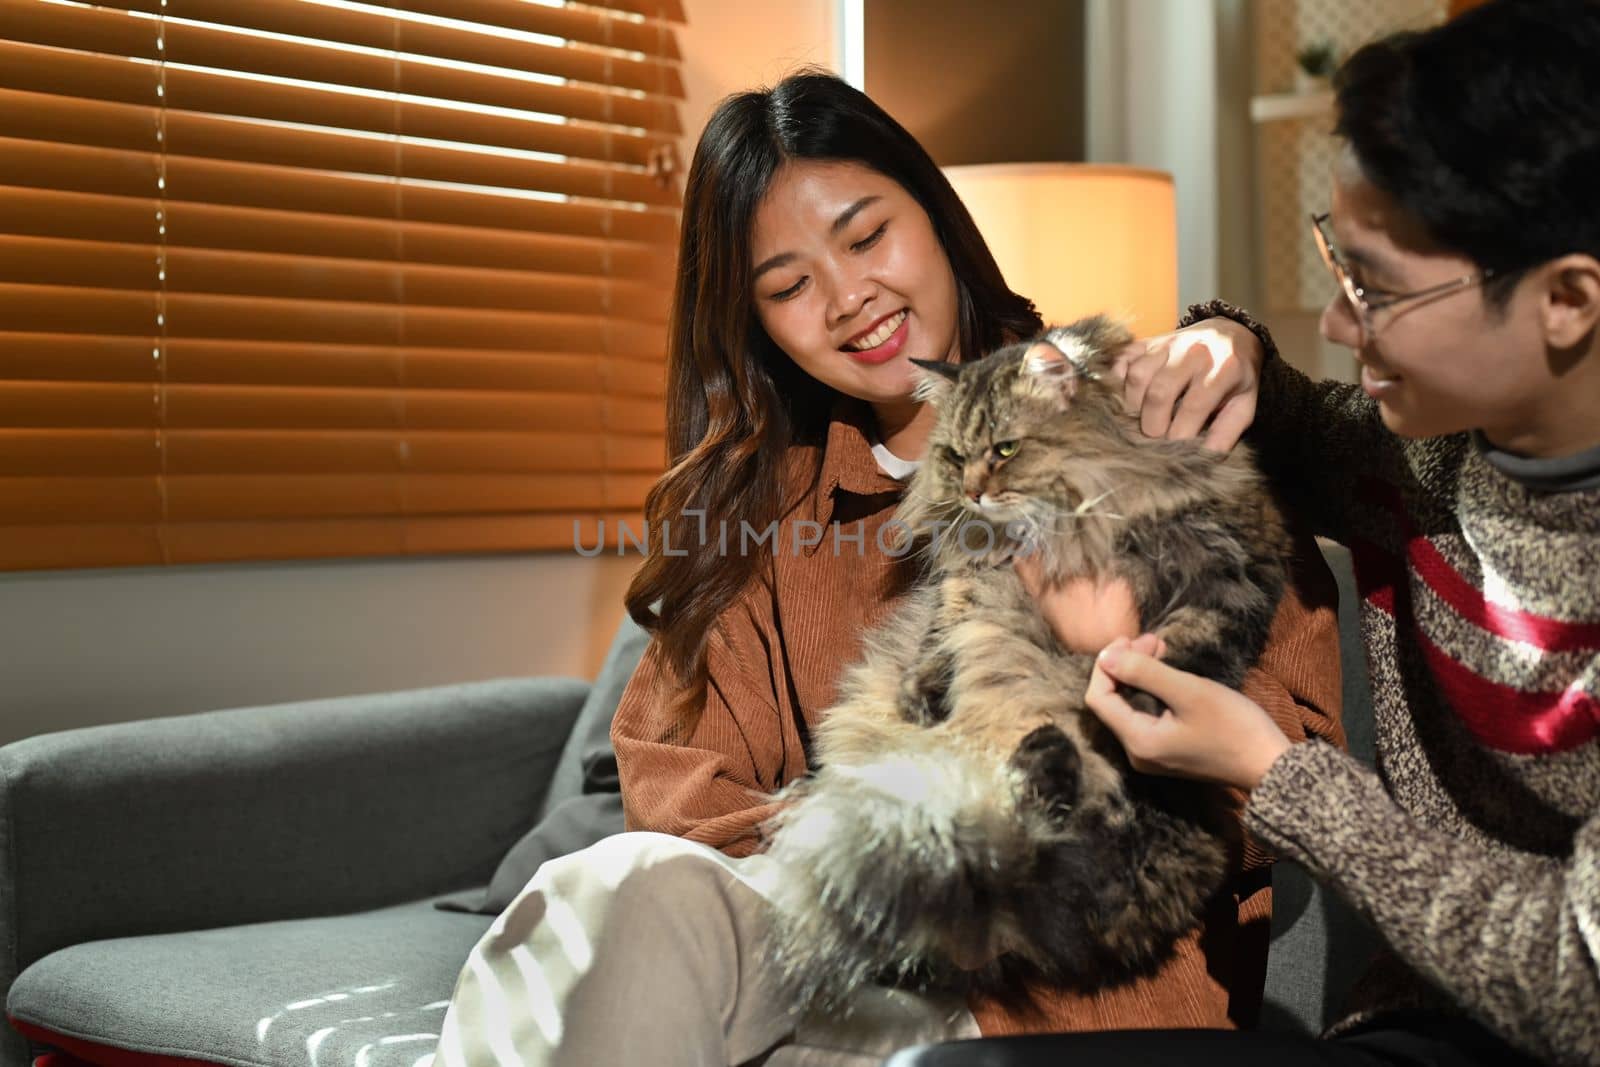 Young couple bonding, playing with cat while resting on couch and spending time together at cozy home.